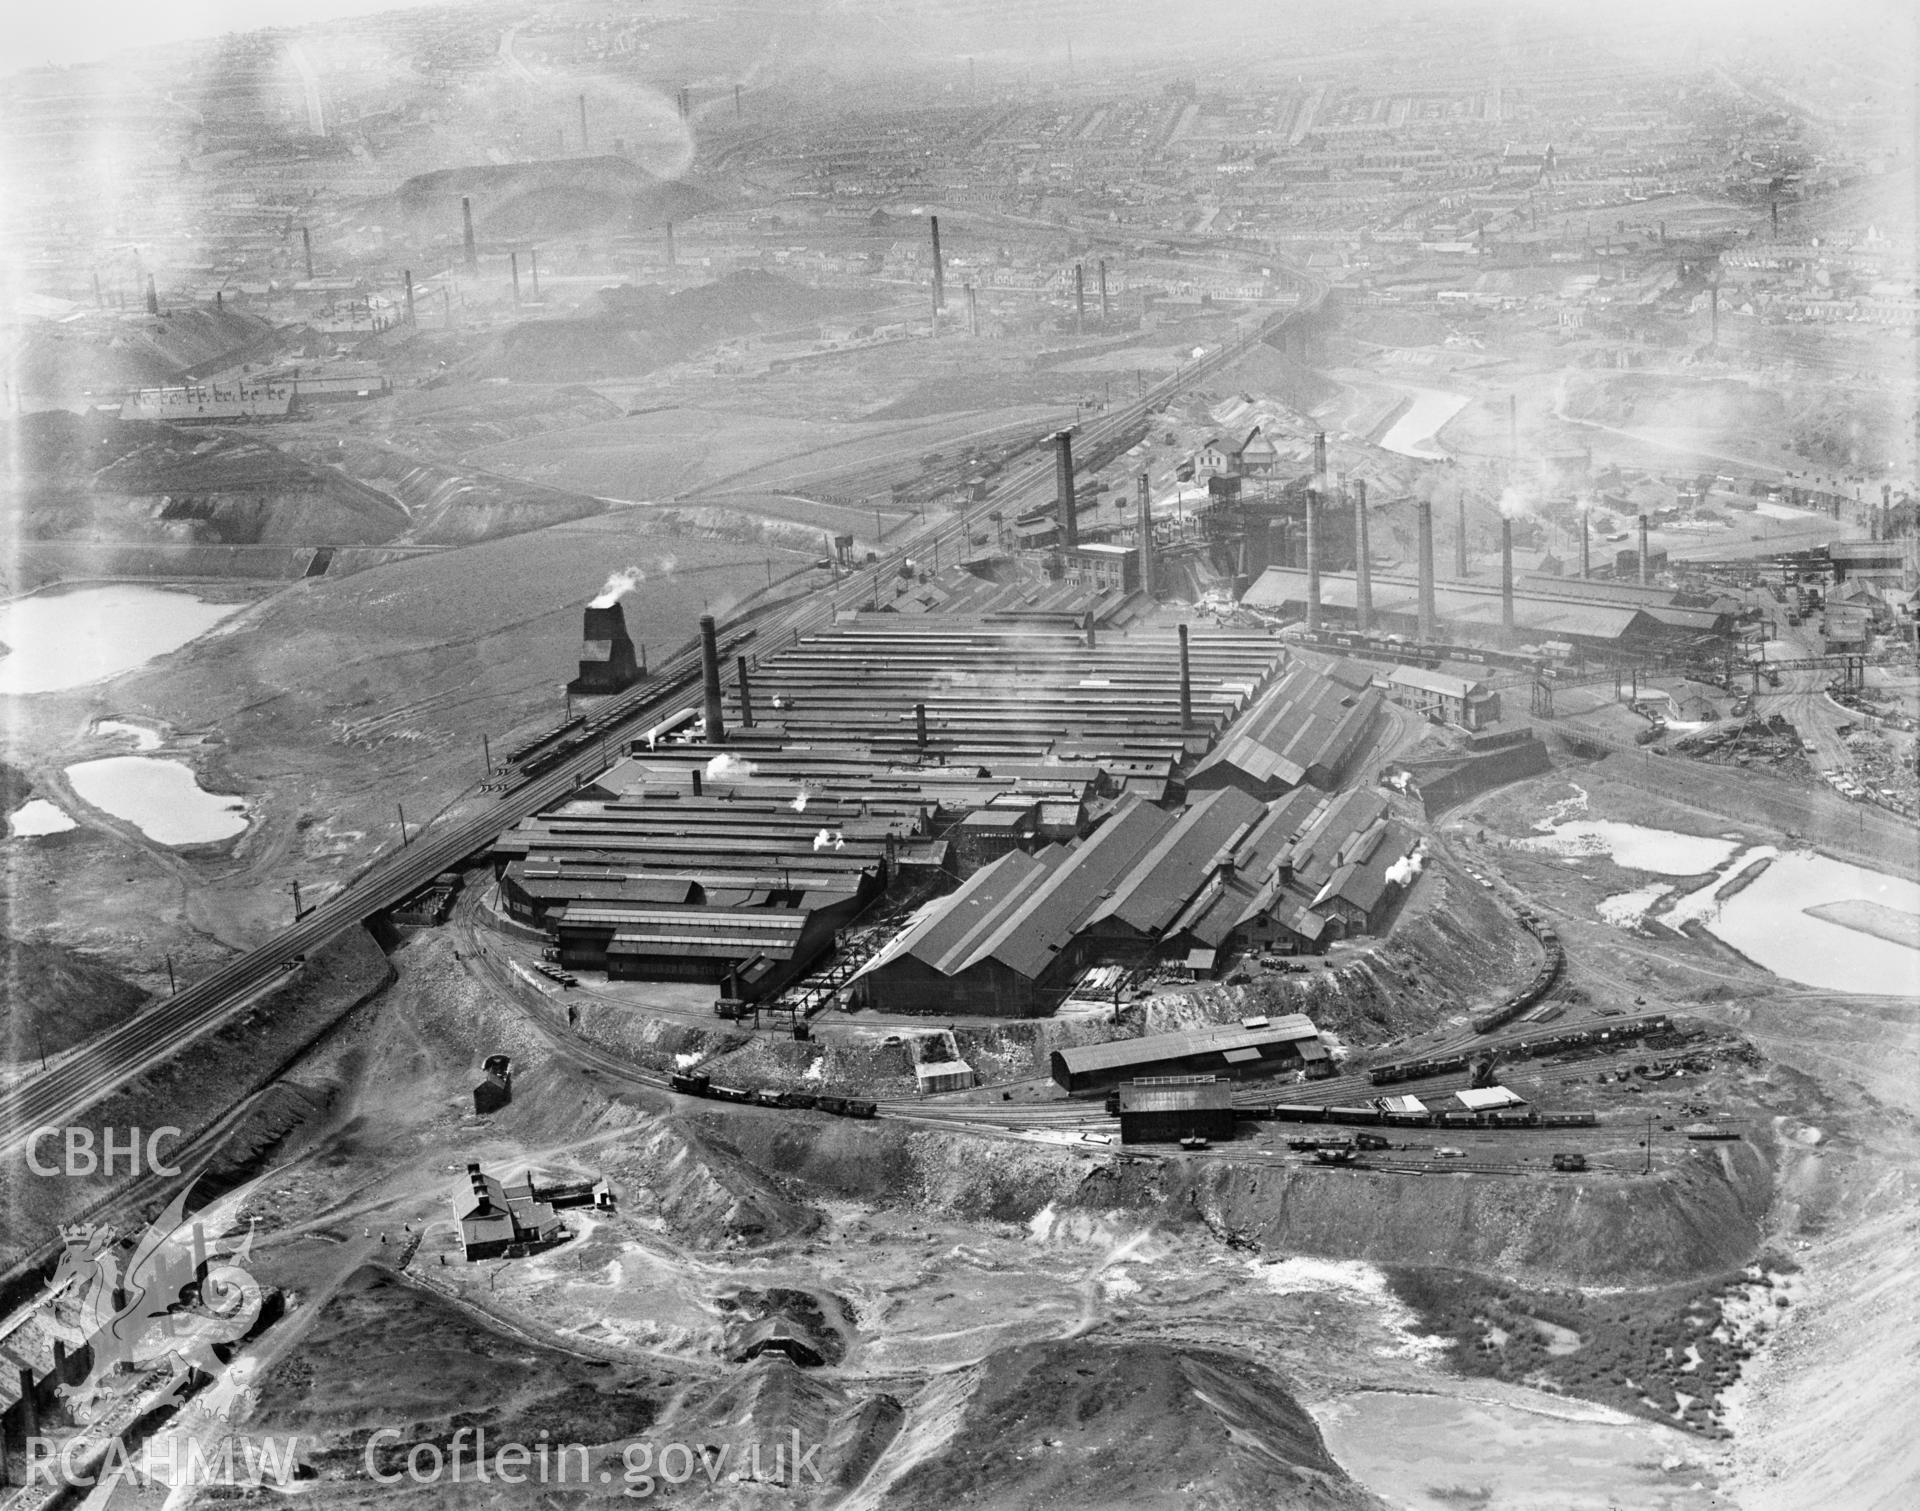 View of the British Mannesmann Tube Co., Landore, Swansea, oblique aerial view. 5?x4? black and white glass plate negative.